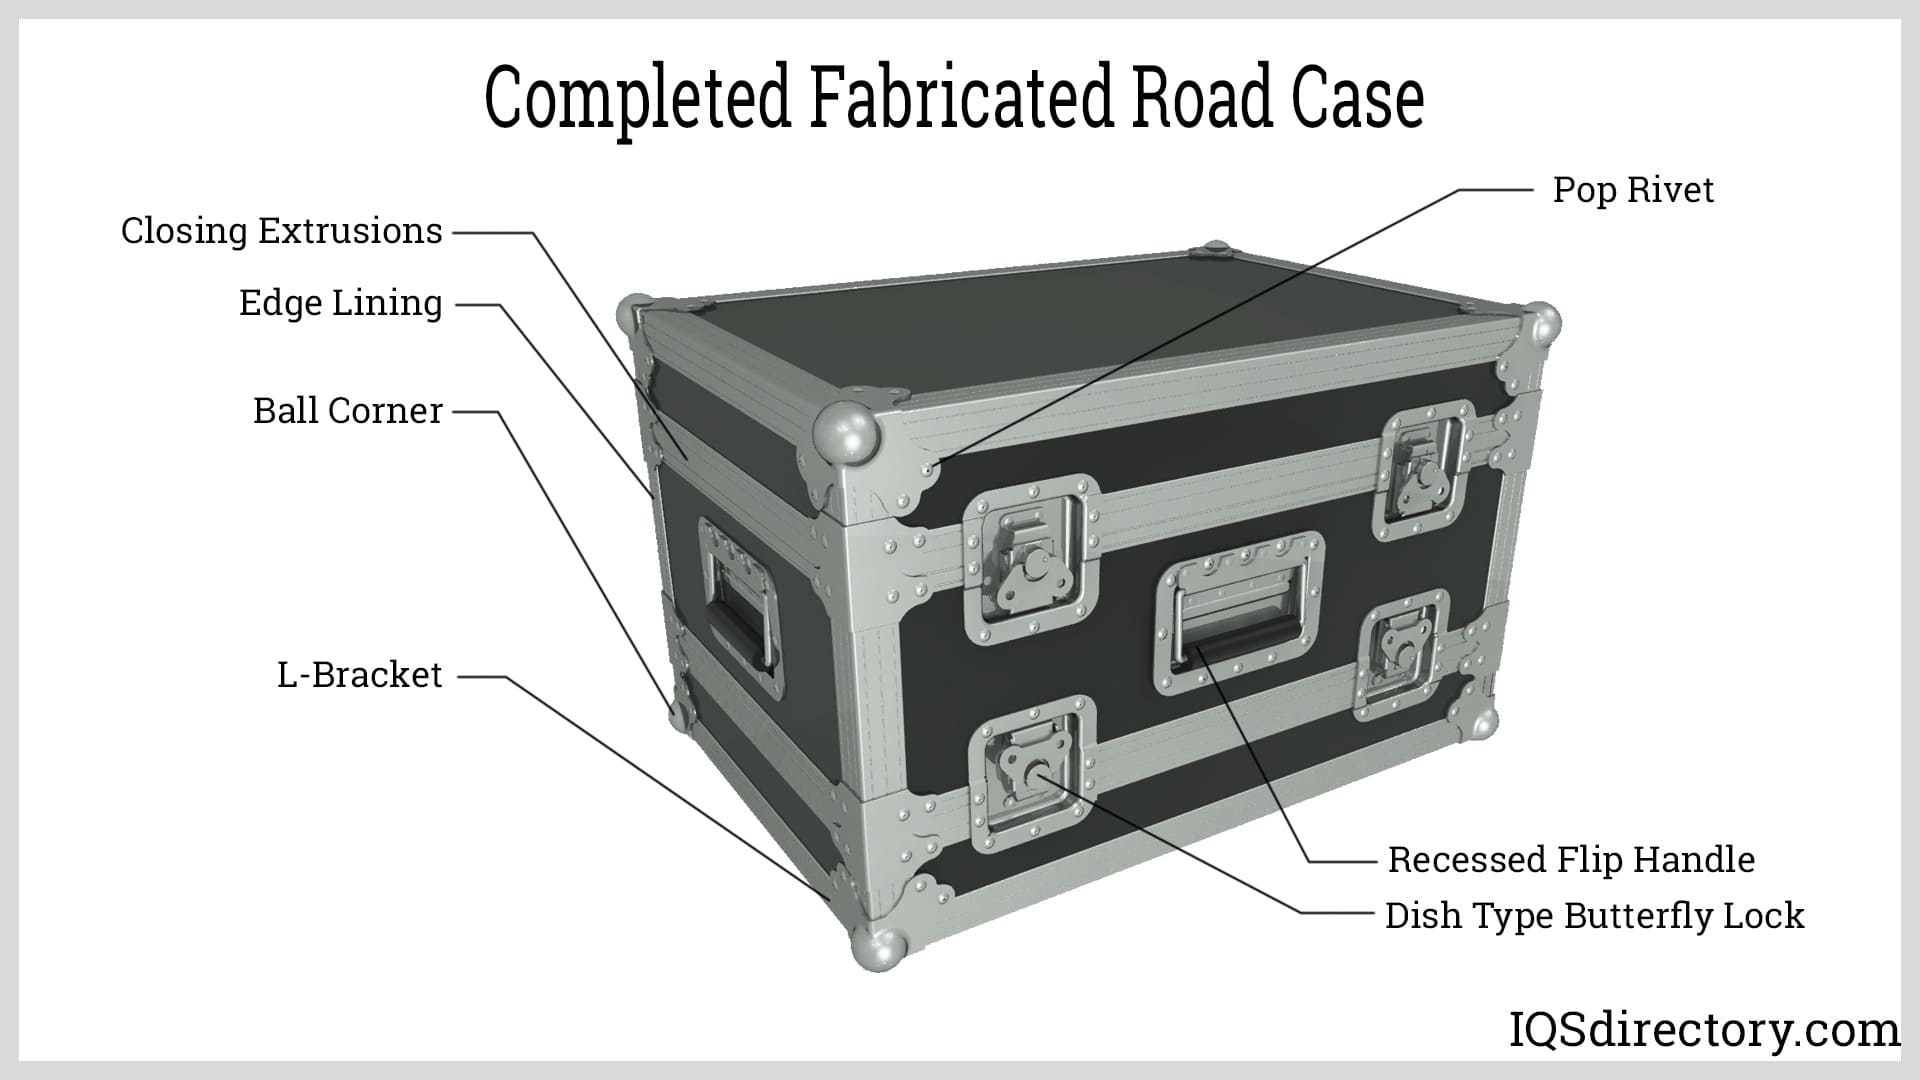 Completed Fabricated Road Case